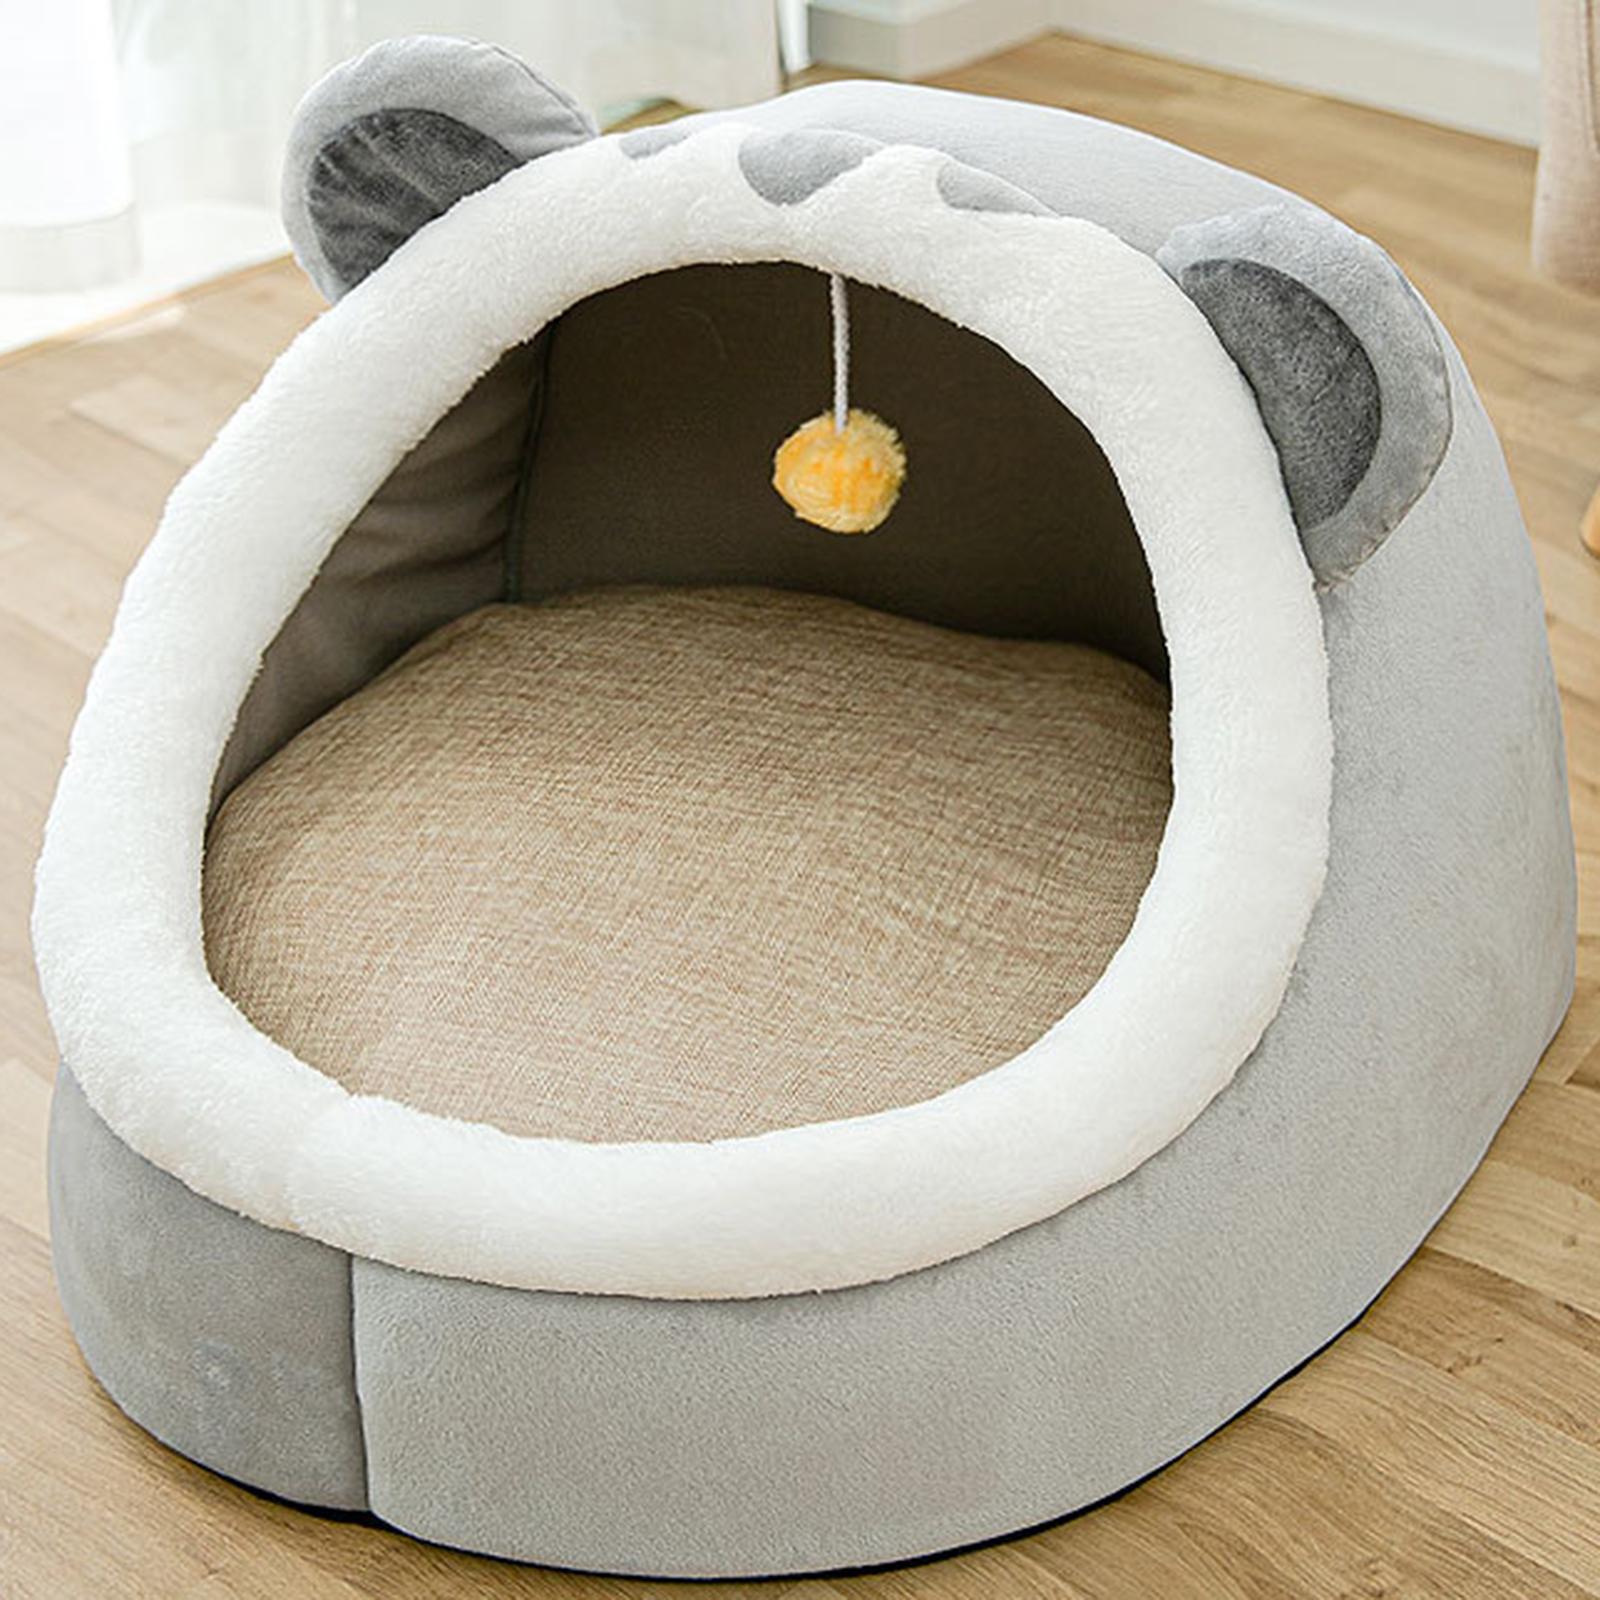 Cute Pet Bed Cat Dog Nest Bed Kennel Warm Comfortable for Kitten Sleeping Gray S